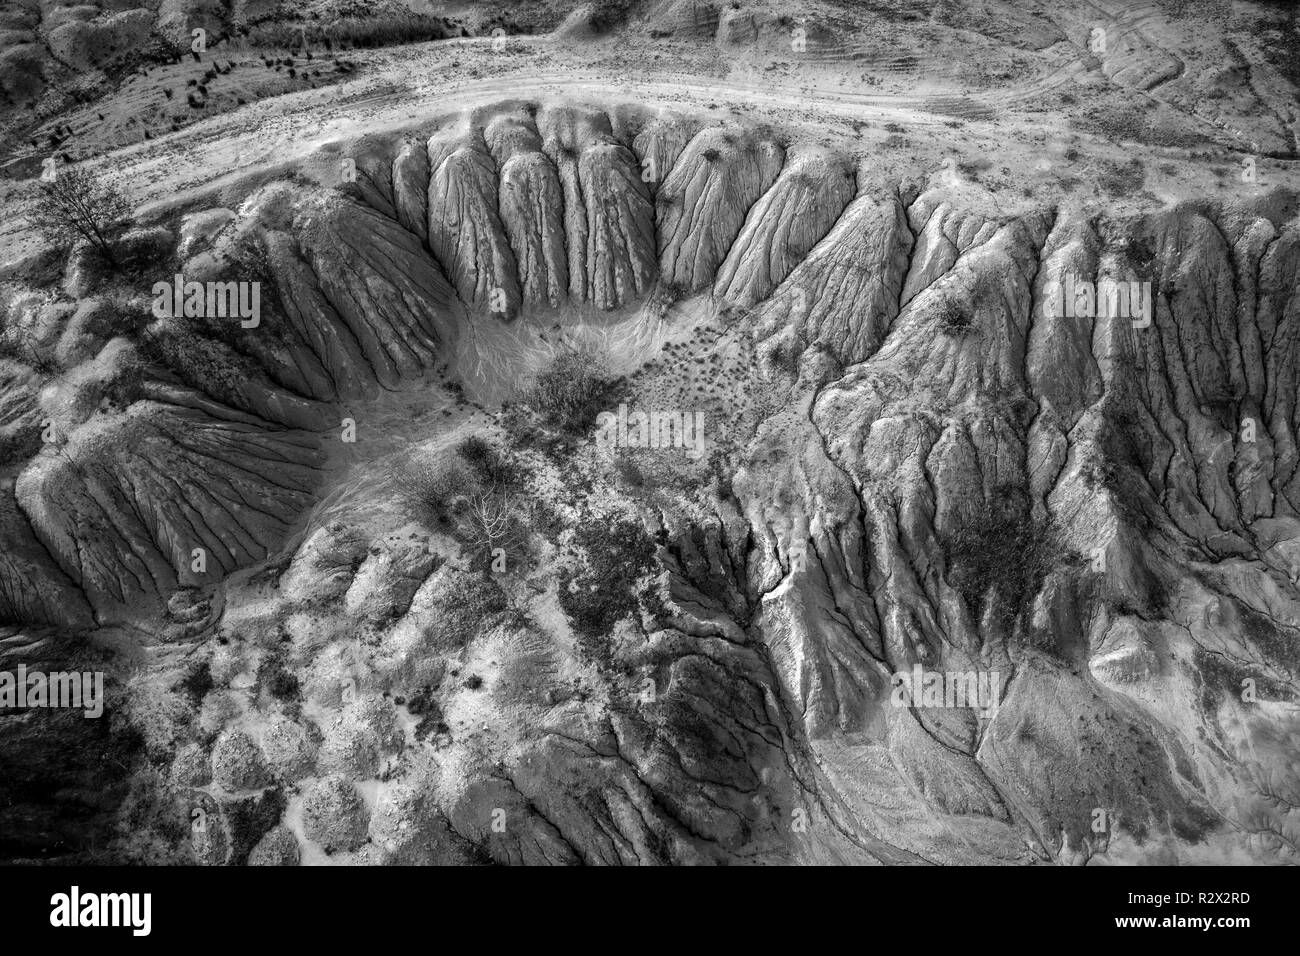 Black and white image of abandoned industrial exploitation, opencast mine. Aerial drone view Stock Photo